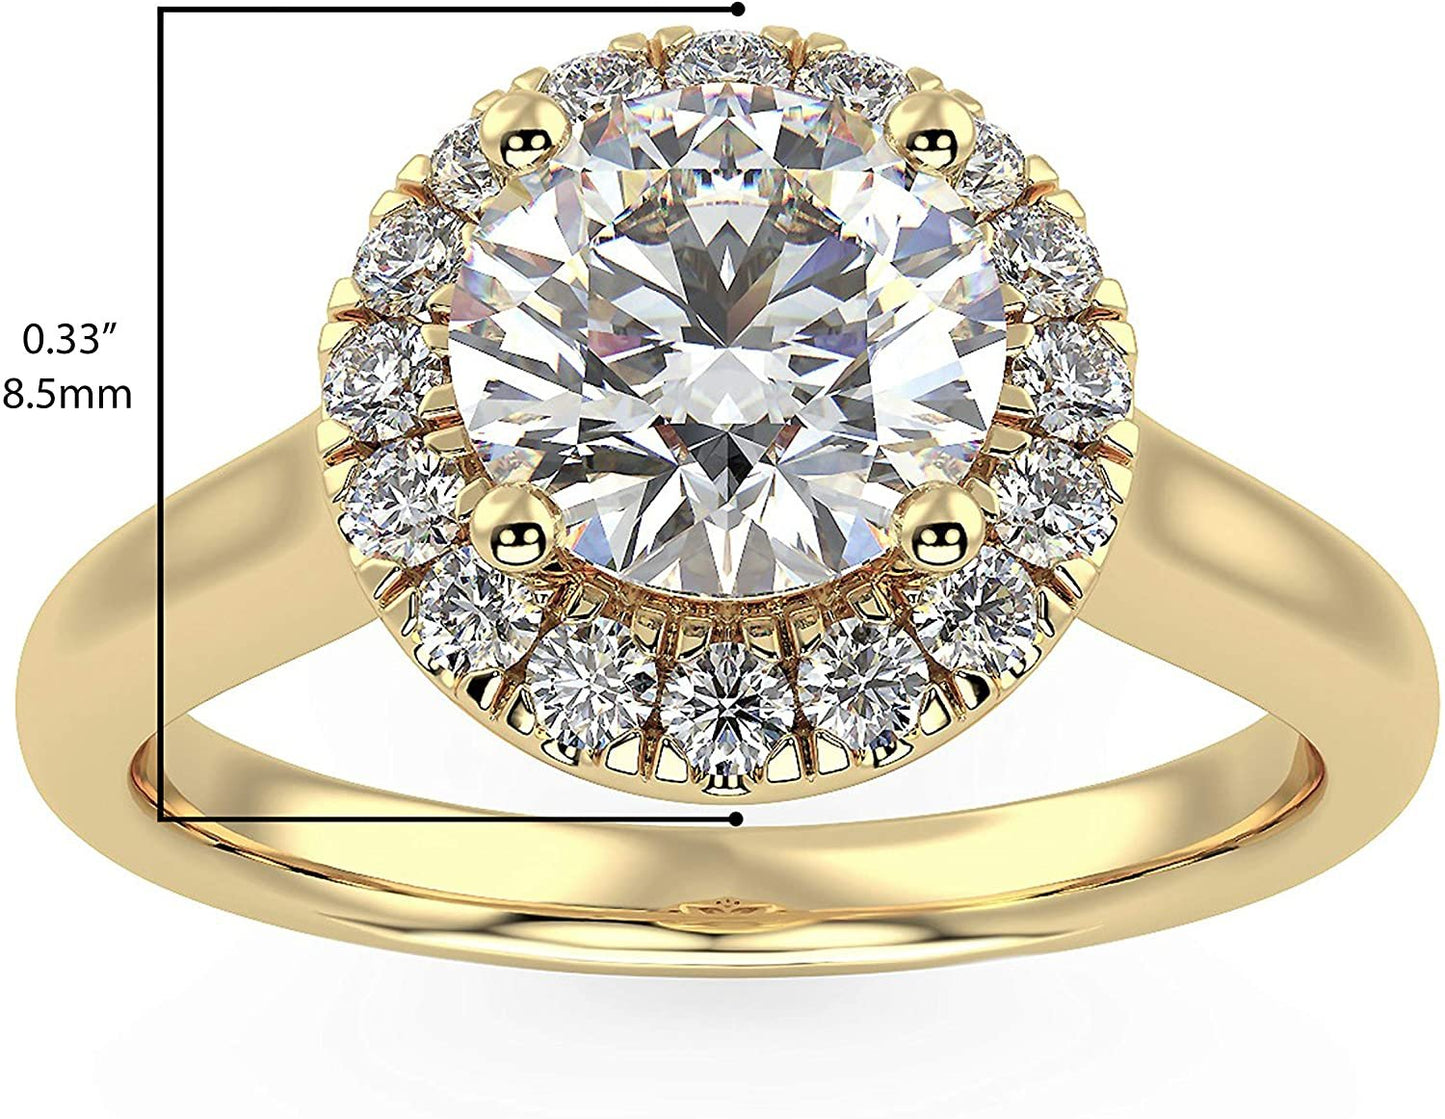 IGI Certified 14K Yellow Gold 1.0 Cttw Brilliant-Cut Lab Created Diamond Round Halo Engagement Ring (Center Stone: G-H Color, VS1-VS2 Clarity) - Size 8